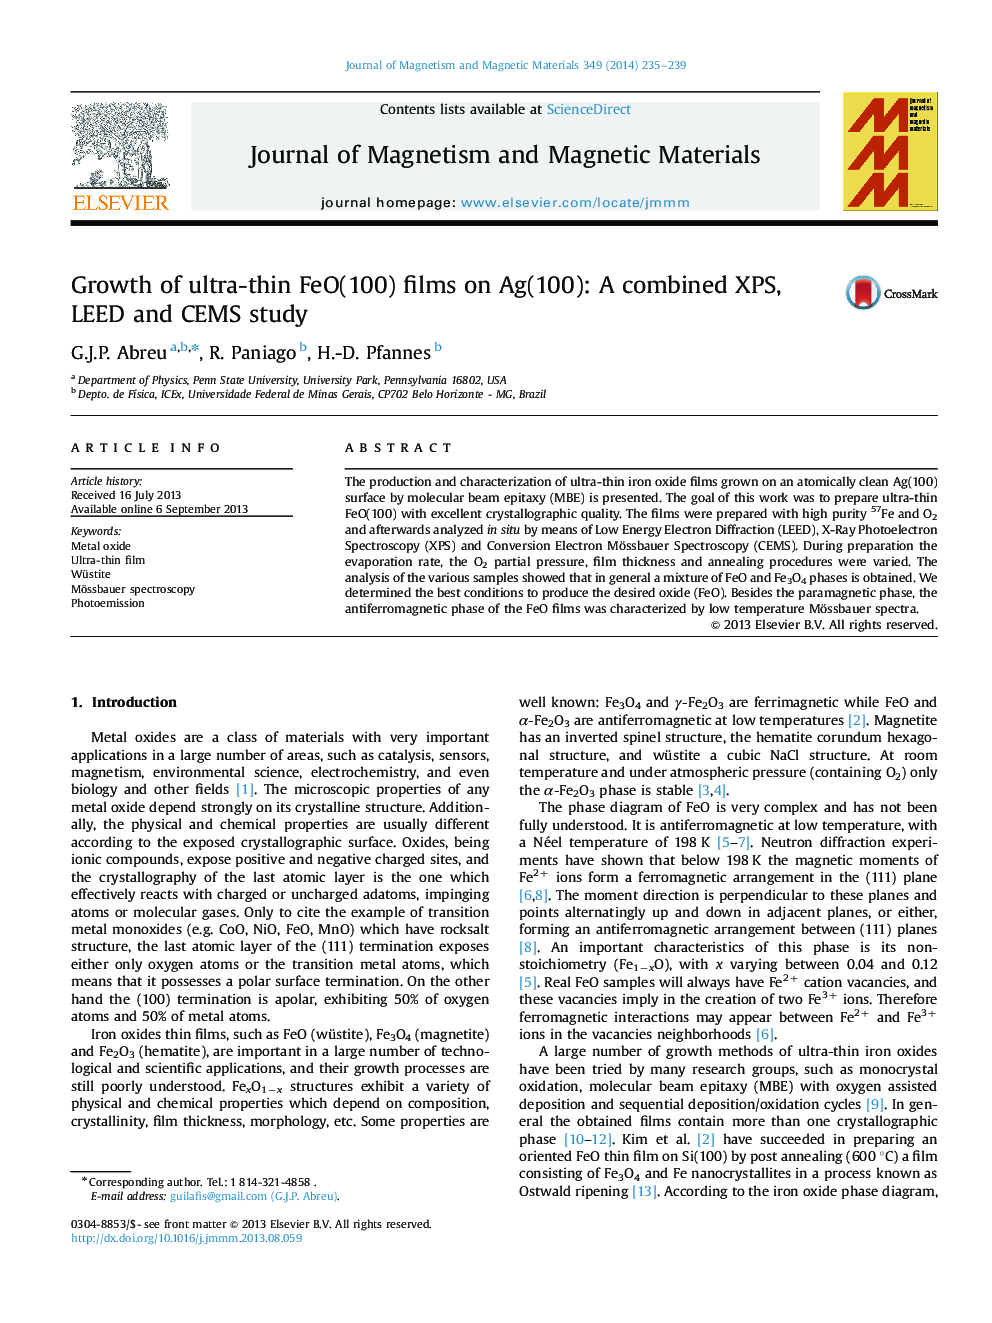 Growth of ultra-thin FeO(100) films on Ag(100): A combined XPS, LEED and CEMS study